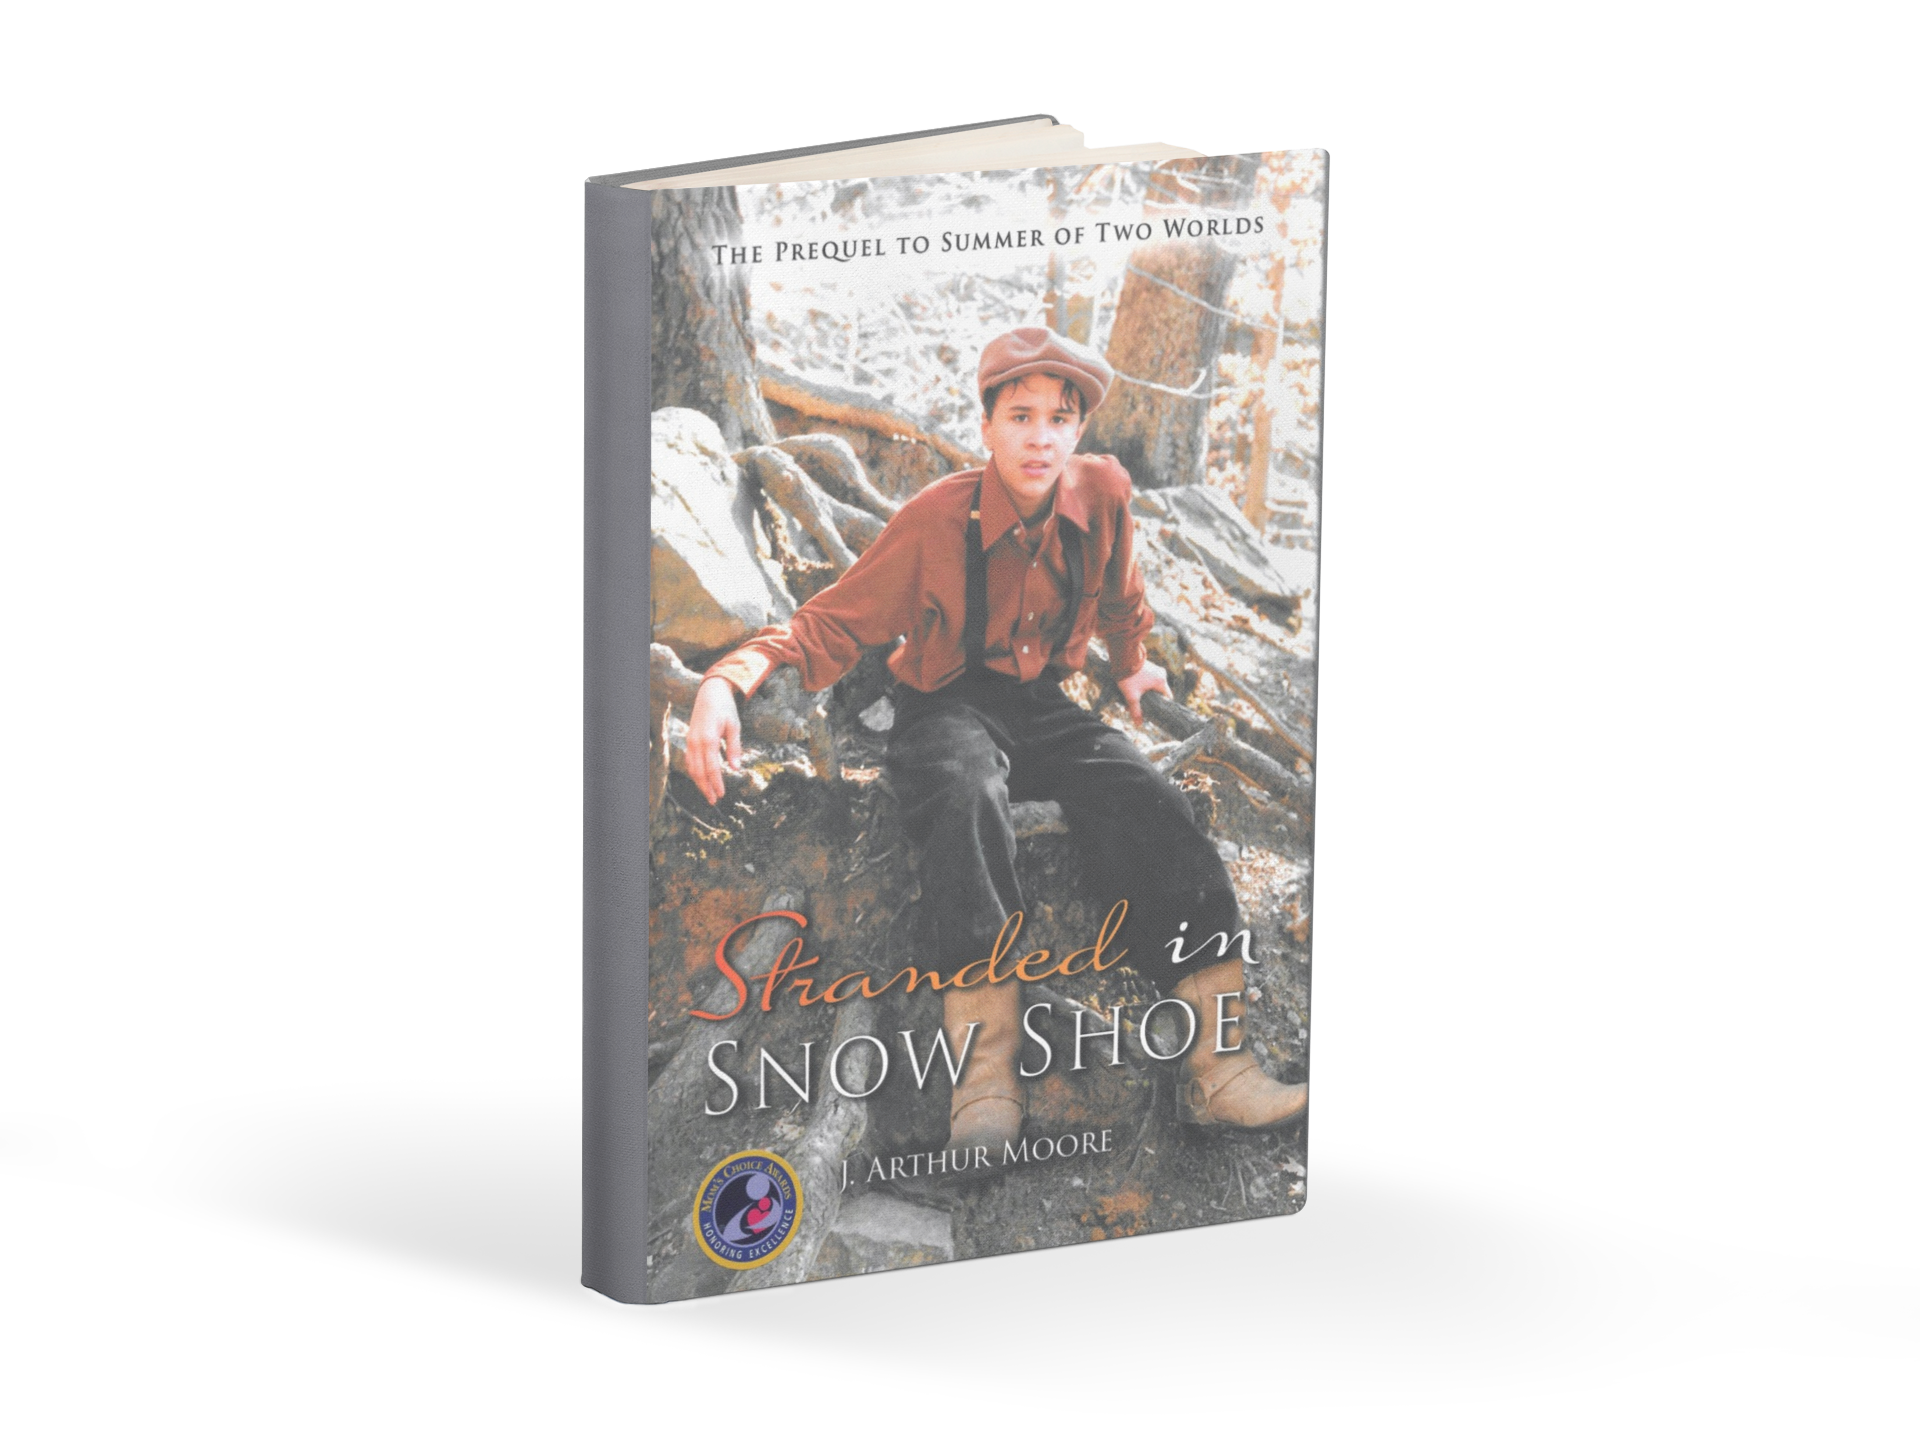 Stranded in Snow Shoe by J. Arthur Moore is a Compelling Coming of Age Story about the Power of Friendship in Overcoming Challenges